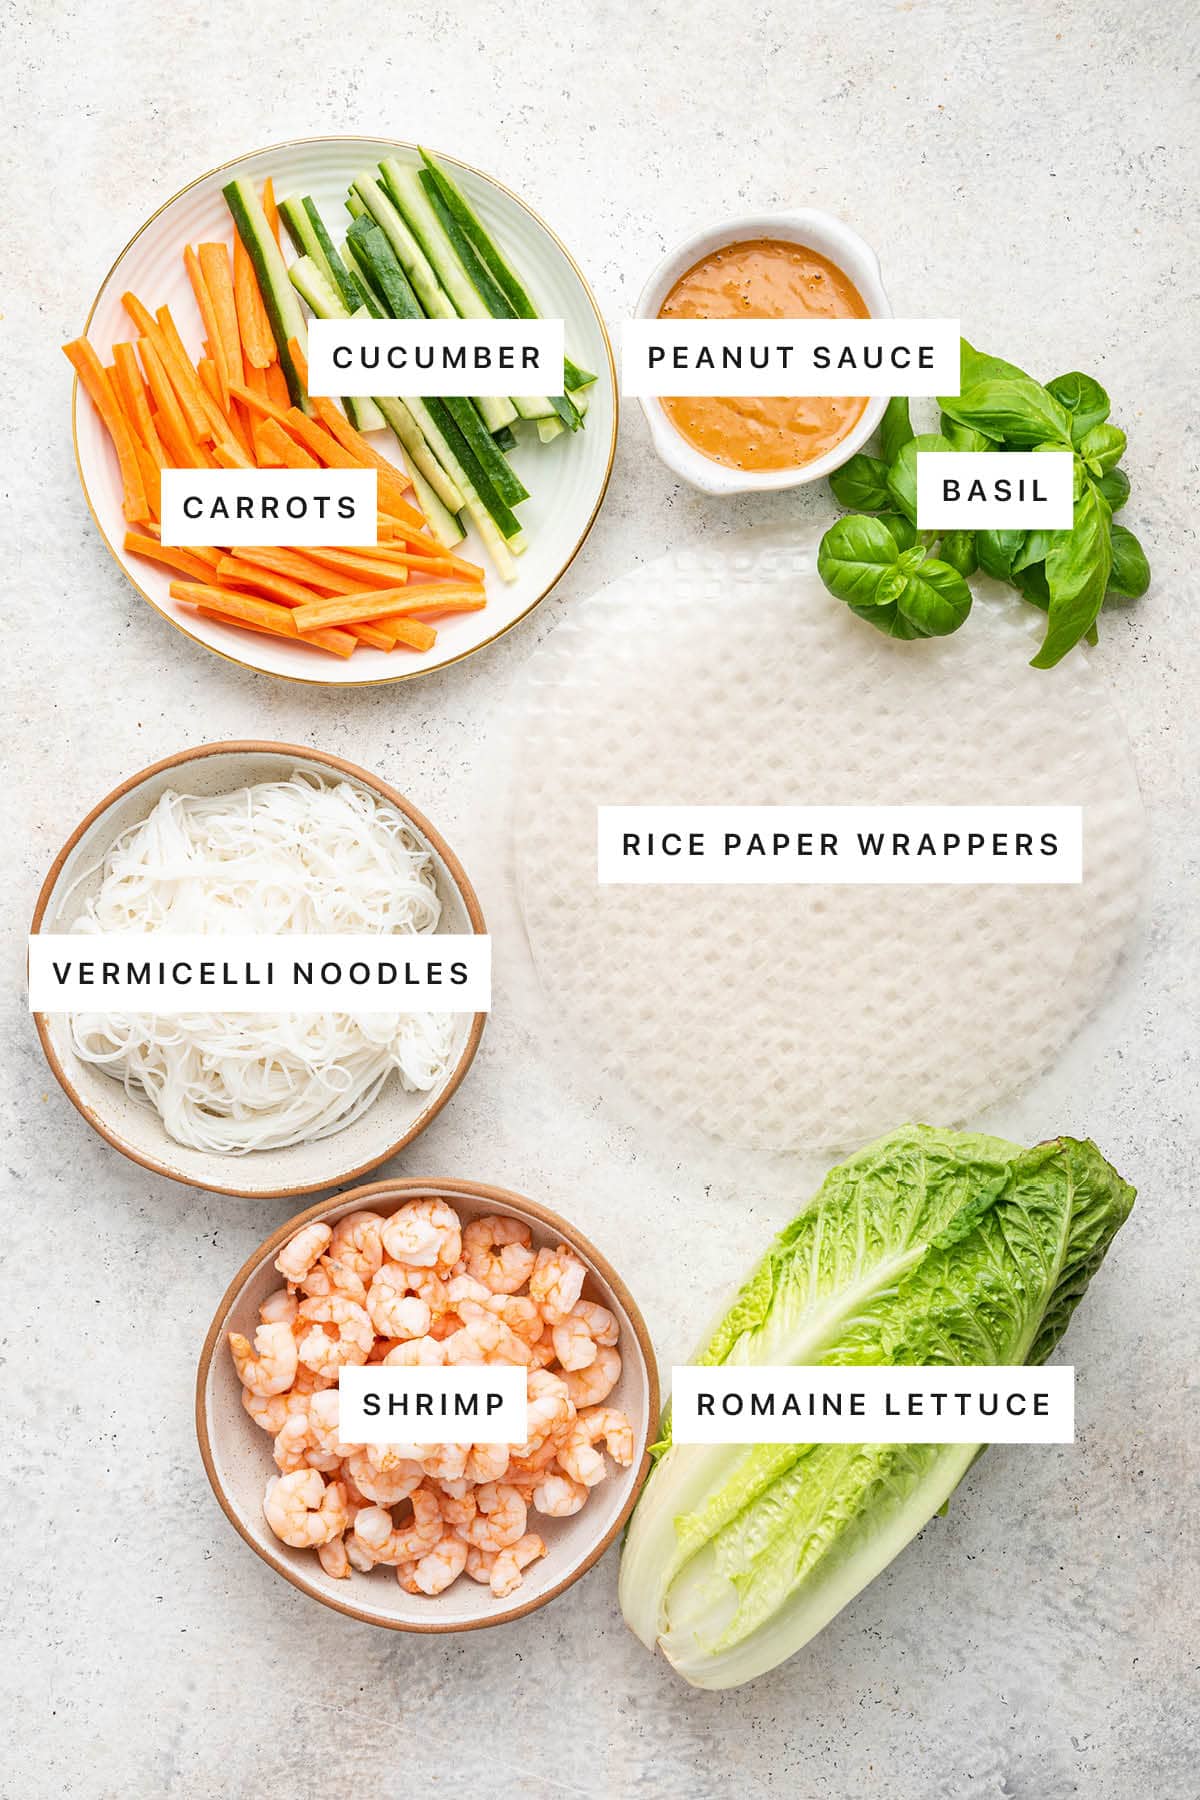 Ingredients measured out to make Shrimp Spring Rolls: carrots, cucumber, peanut sauce, basil, rice paper wrappers, vermicelli noodles, shrimp and romaine lettuce.